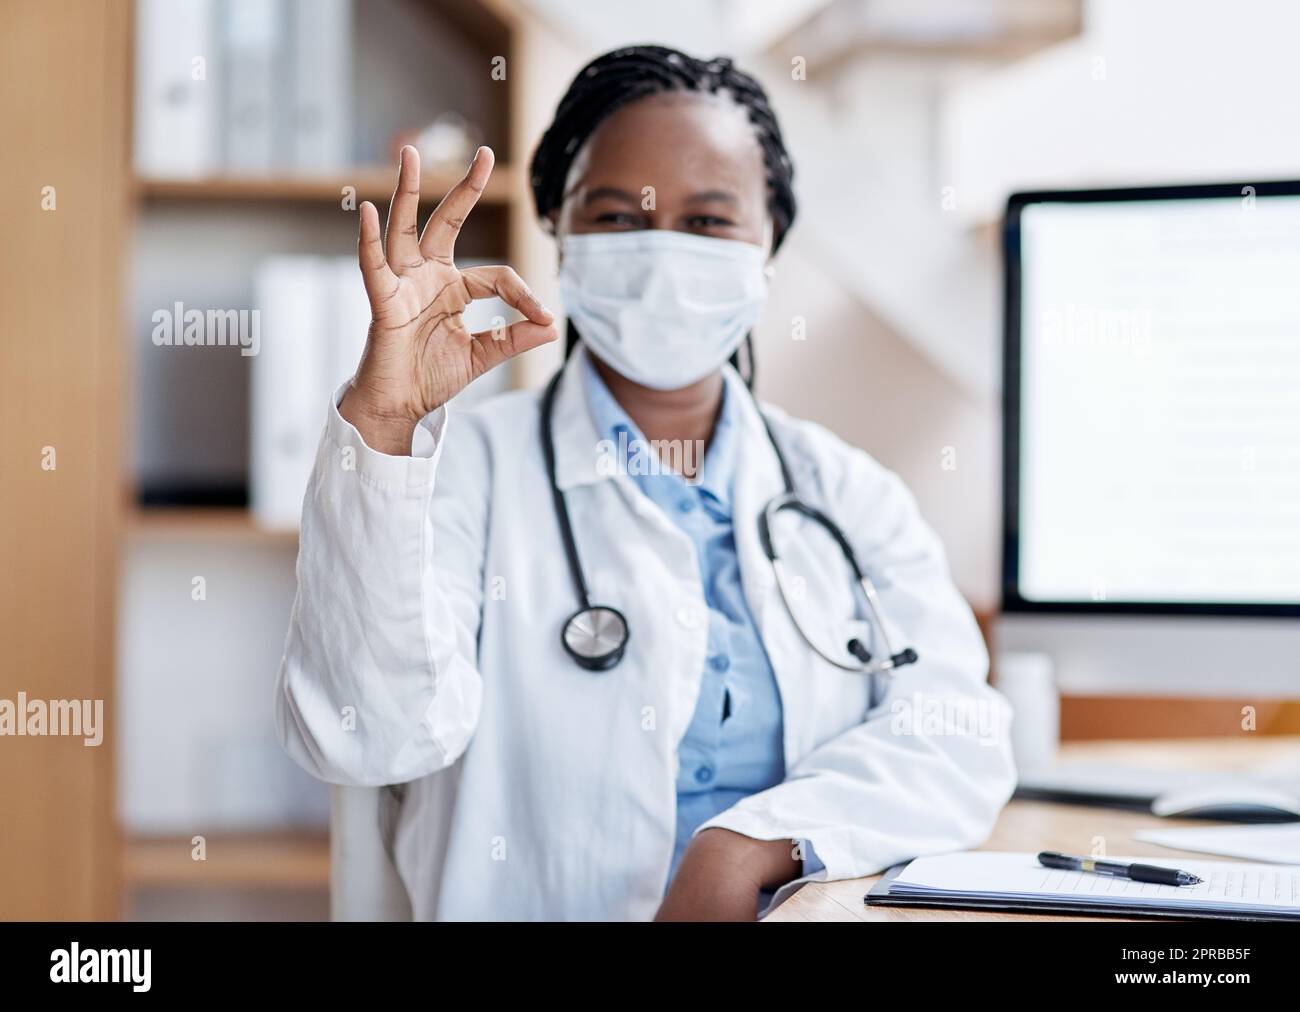 Practising professionalism that leads to perfectionism. Portrait of a young doctor making an okay sign. Stock Photo